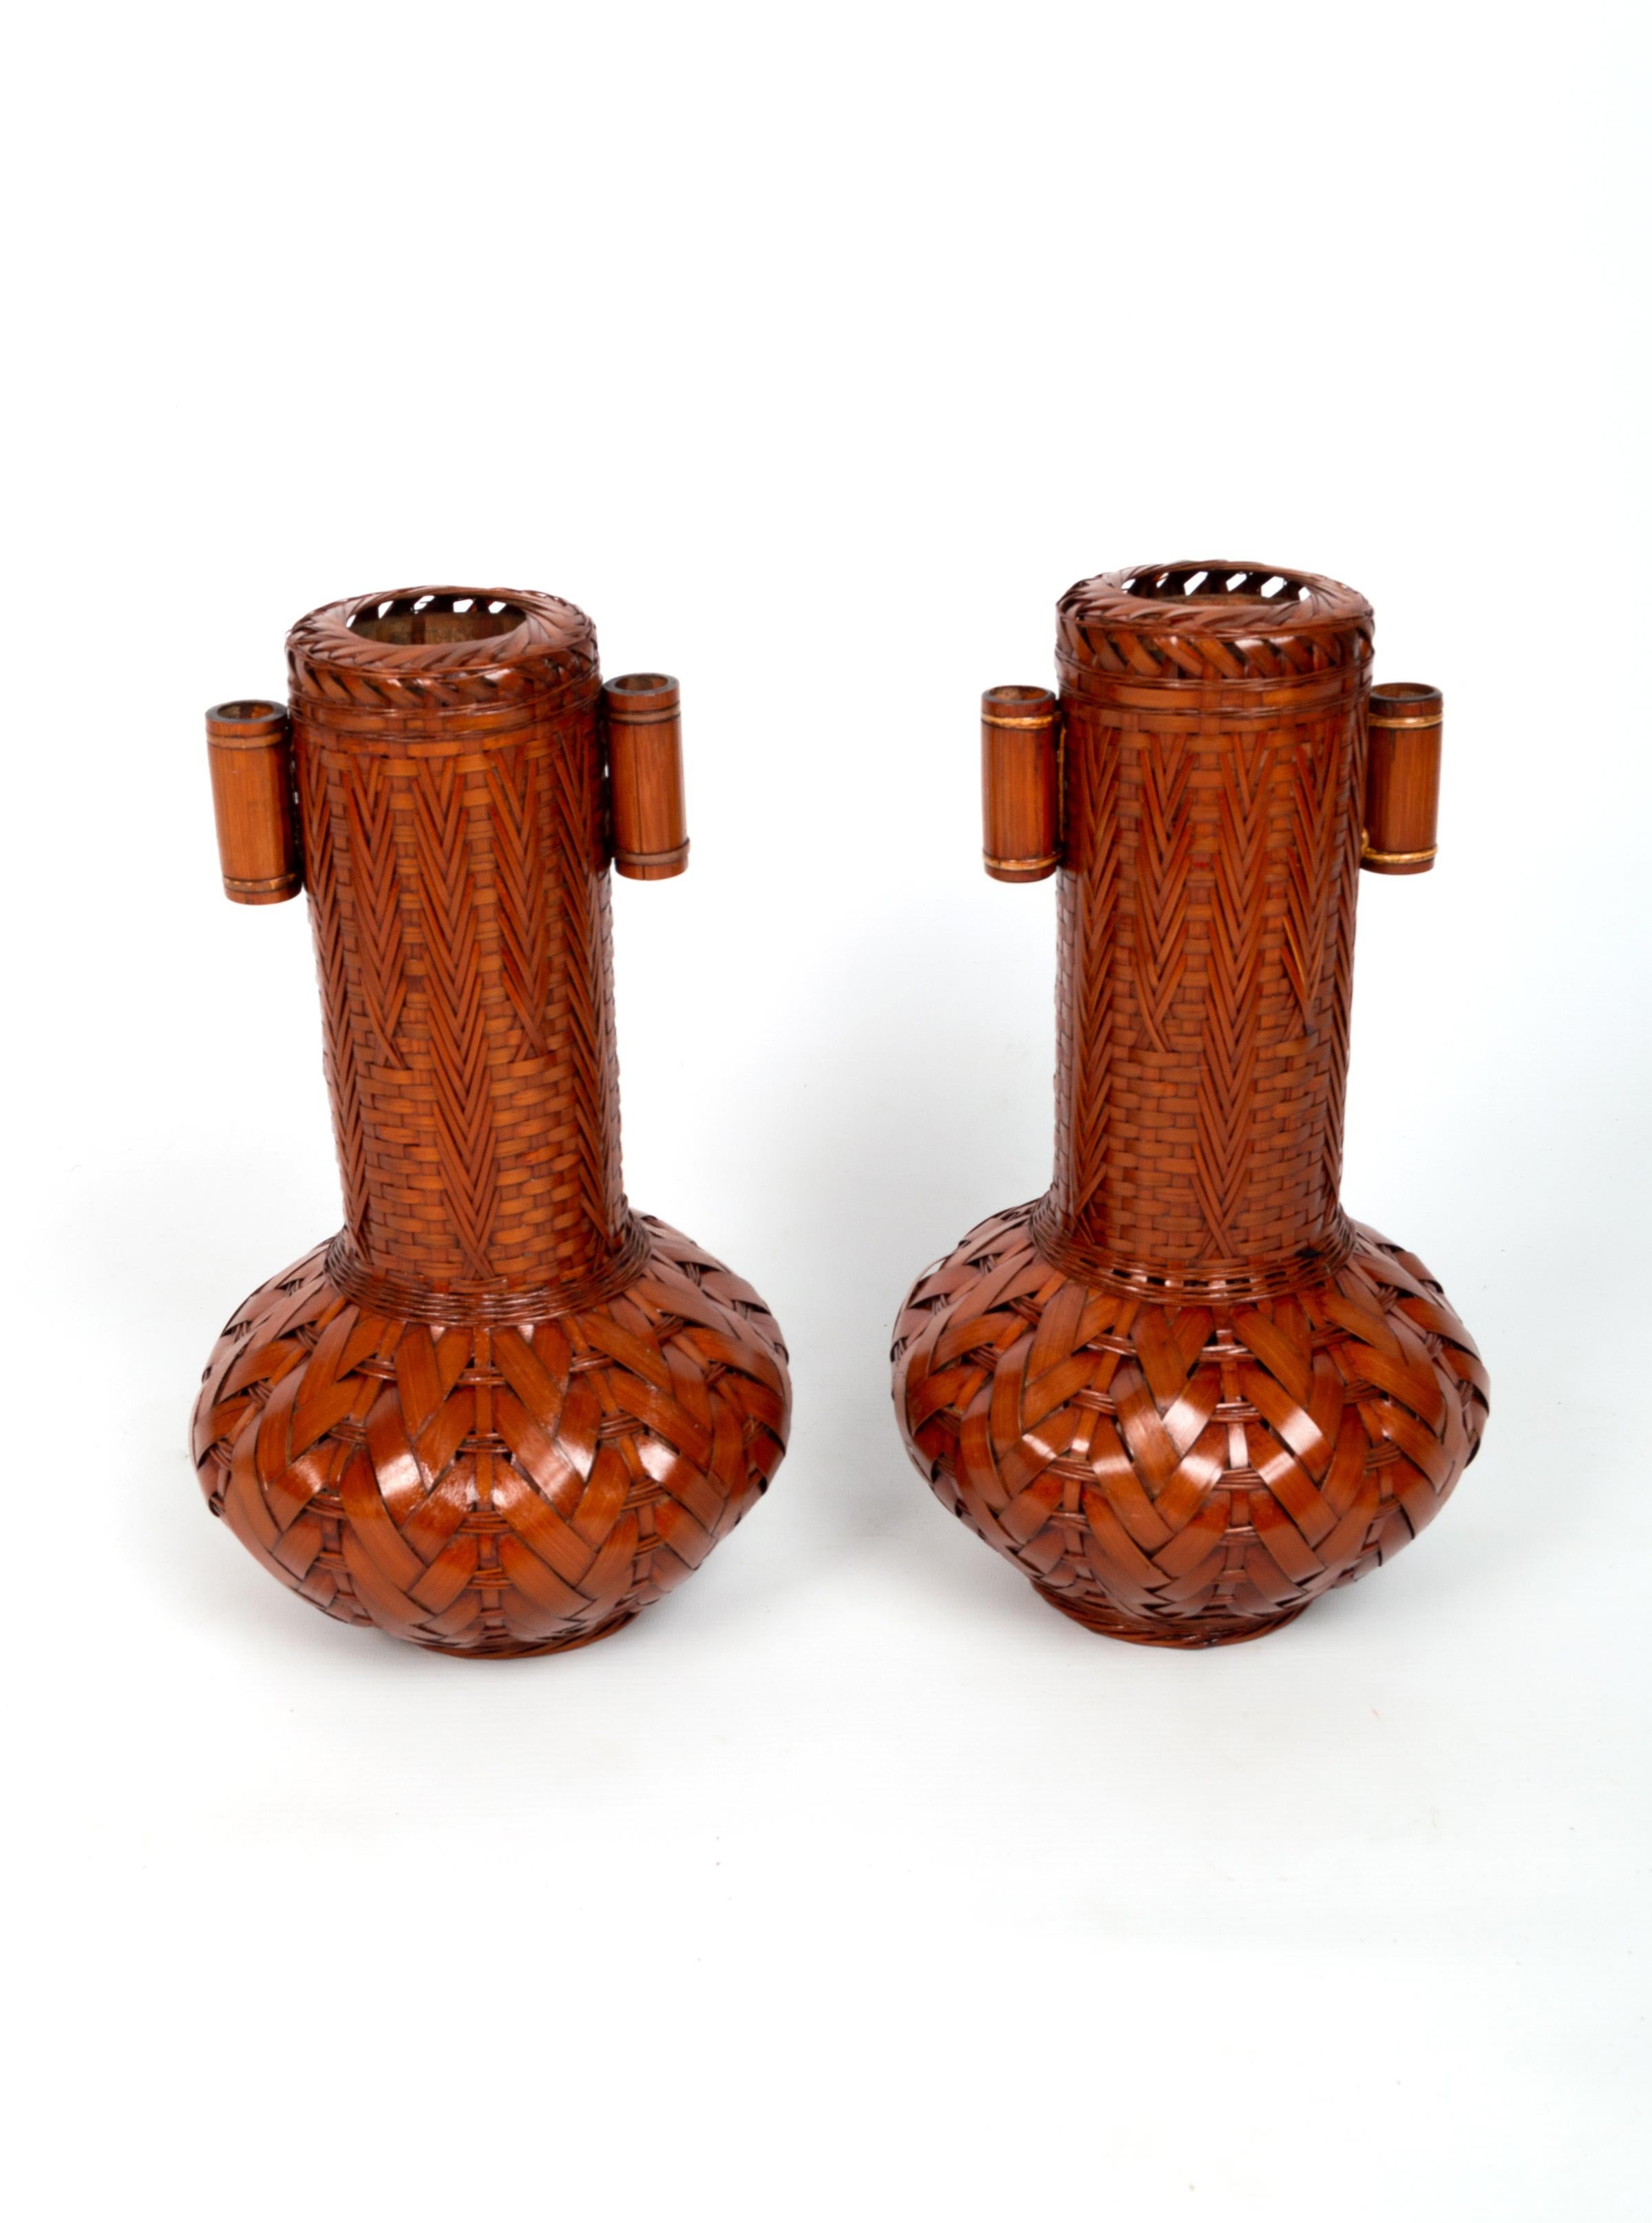 20th Century Pair Japanese Lacquered Woven Bamboo Ikebana Vases, Japan, C.1950 For Sale